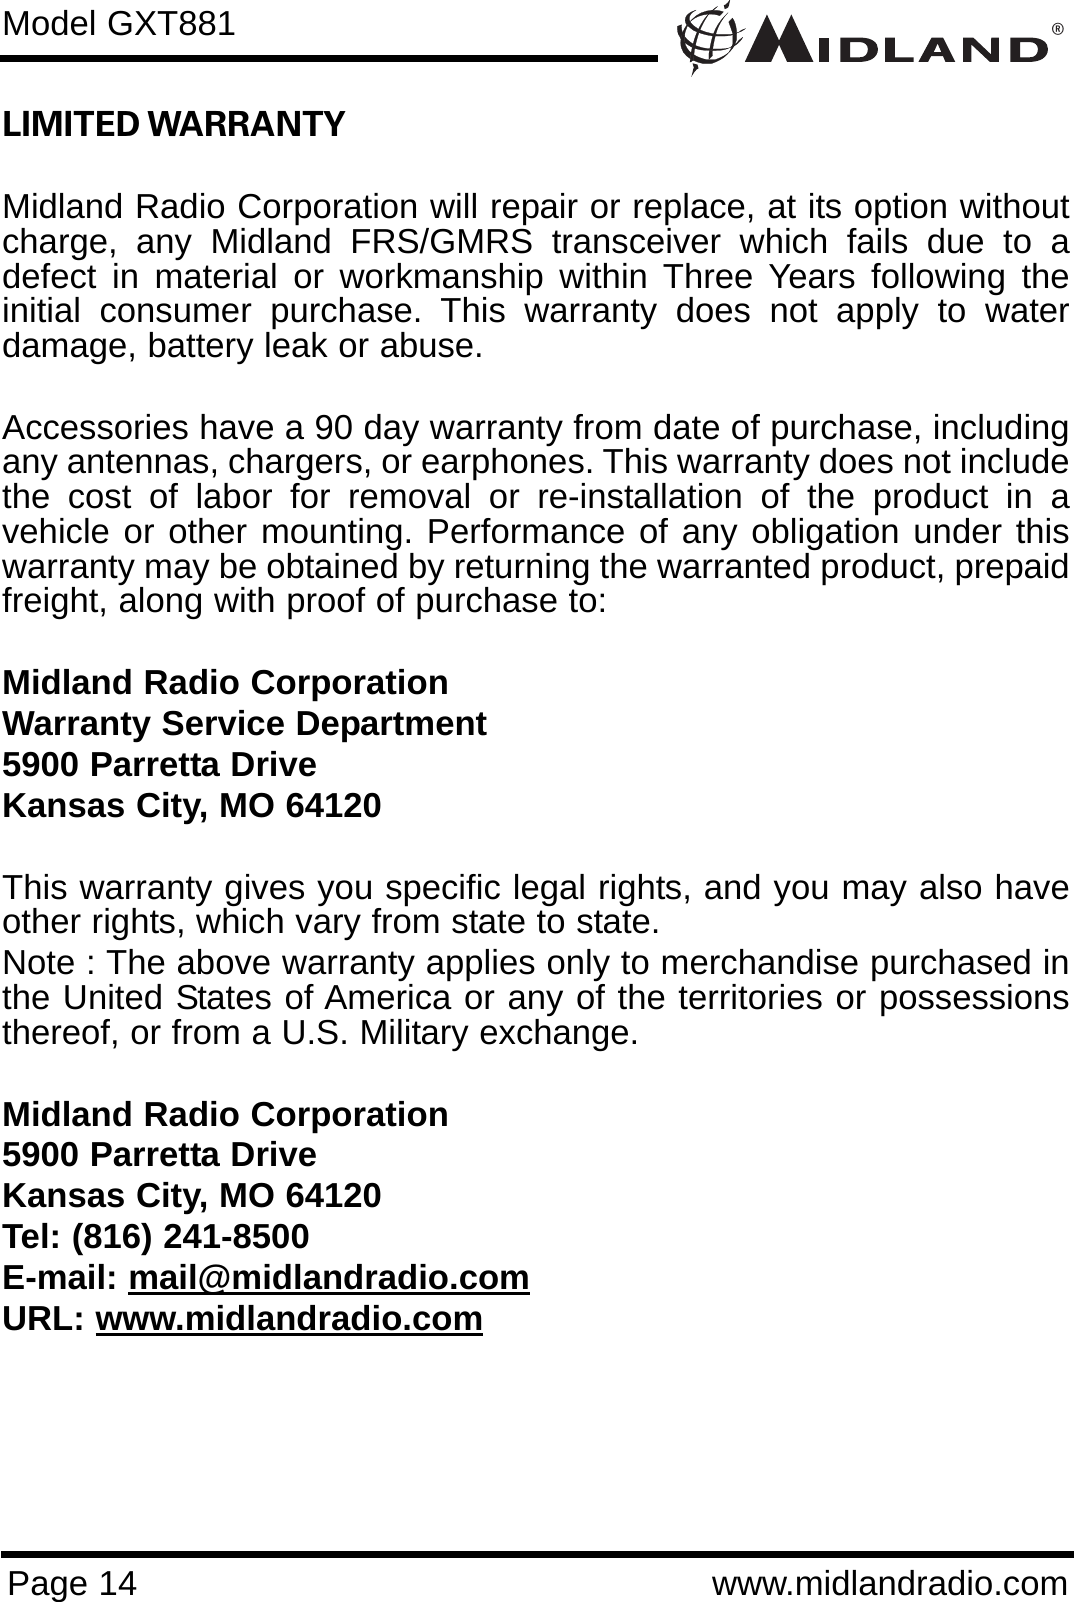 ®Page 14 www.midlandradio.comLIMITED WARRANTY Midland Radio Corporation will repair or replace, at its option withoutcharge, any Midland FRS/GMRS transceiver which fails due to adefect in material or workmanship within Three Years following theinitial consumer purchase. This warranty does not apply to waterdamage, battery leak or abuse.Accessories have a 90 day warranty from date of purchase, includingany antennas, chargers, or earphones. This warranty does not includethe cost of labor for removal or re-installation of the product in avehicle or other mounting. Performance of any obligation under thiswarranty may be obtained by returning the warranted product, prepaidfreight, along with proof of purchase to:Midland Radio CorporationWarranty Service Department5900 Parretta DriveKansas City, MO 64120This warranty gives you specific legal rights, and you may also haveother rights, which vary from state to state.Note : The above warranty applies only to merchandise purchased inthe United States of America or any of the territories or possessionsthereof, or from a U.S. Military exchange.Midland Radio Corporation5900 Parretta DriveKansas City, MO 64120Tel: (816) 241-8500E-mail: mail@midlandradio.comURL: www.midlandradio.comModel GXT881